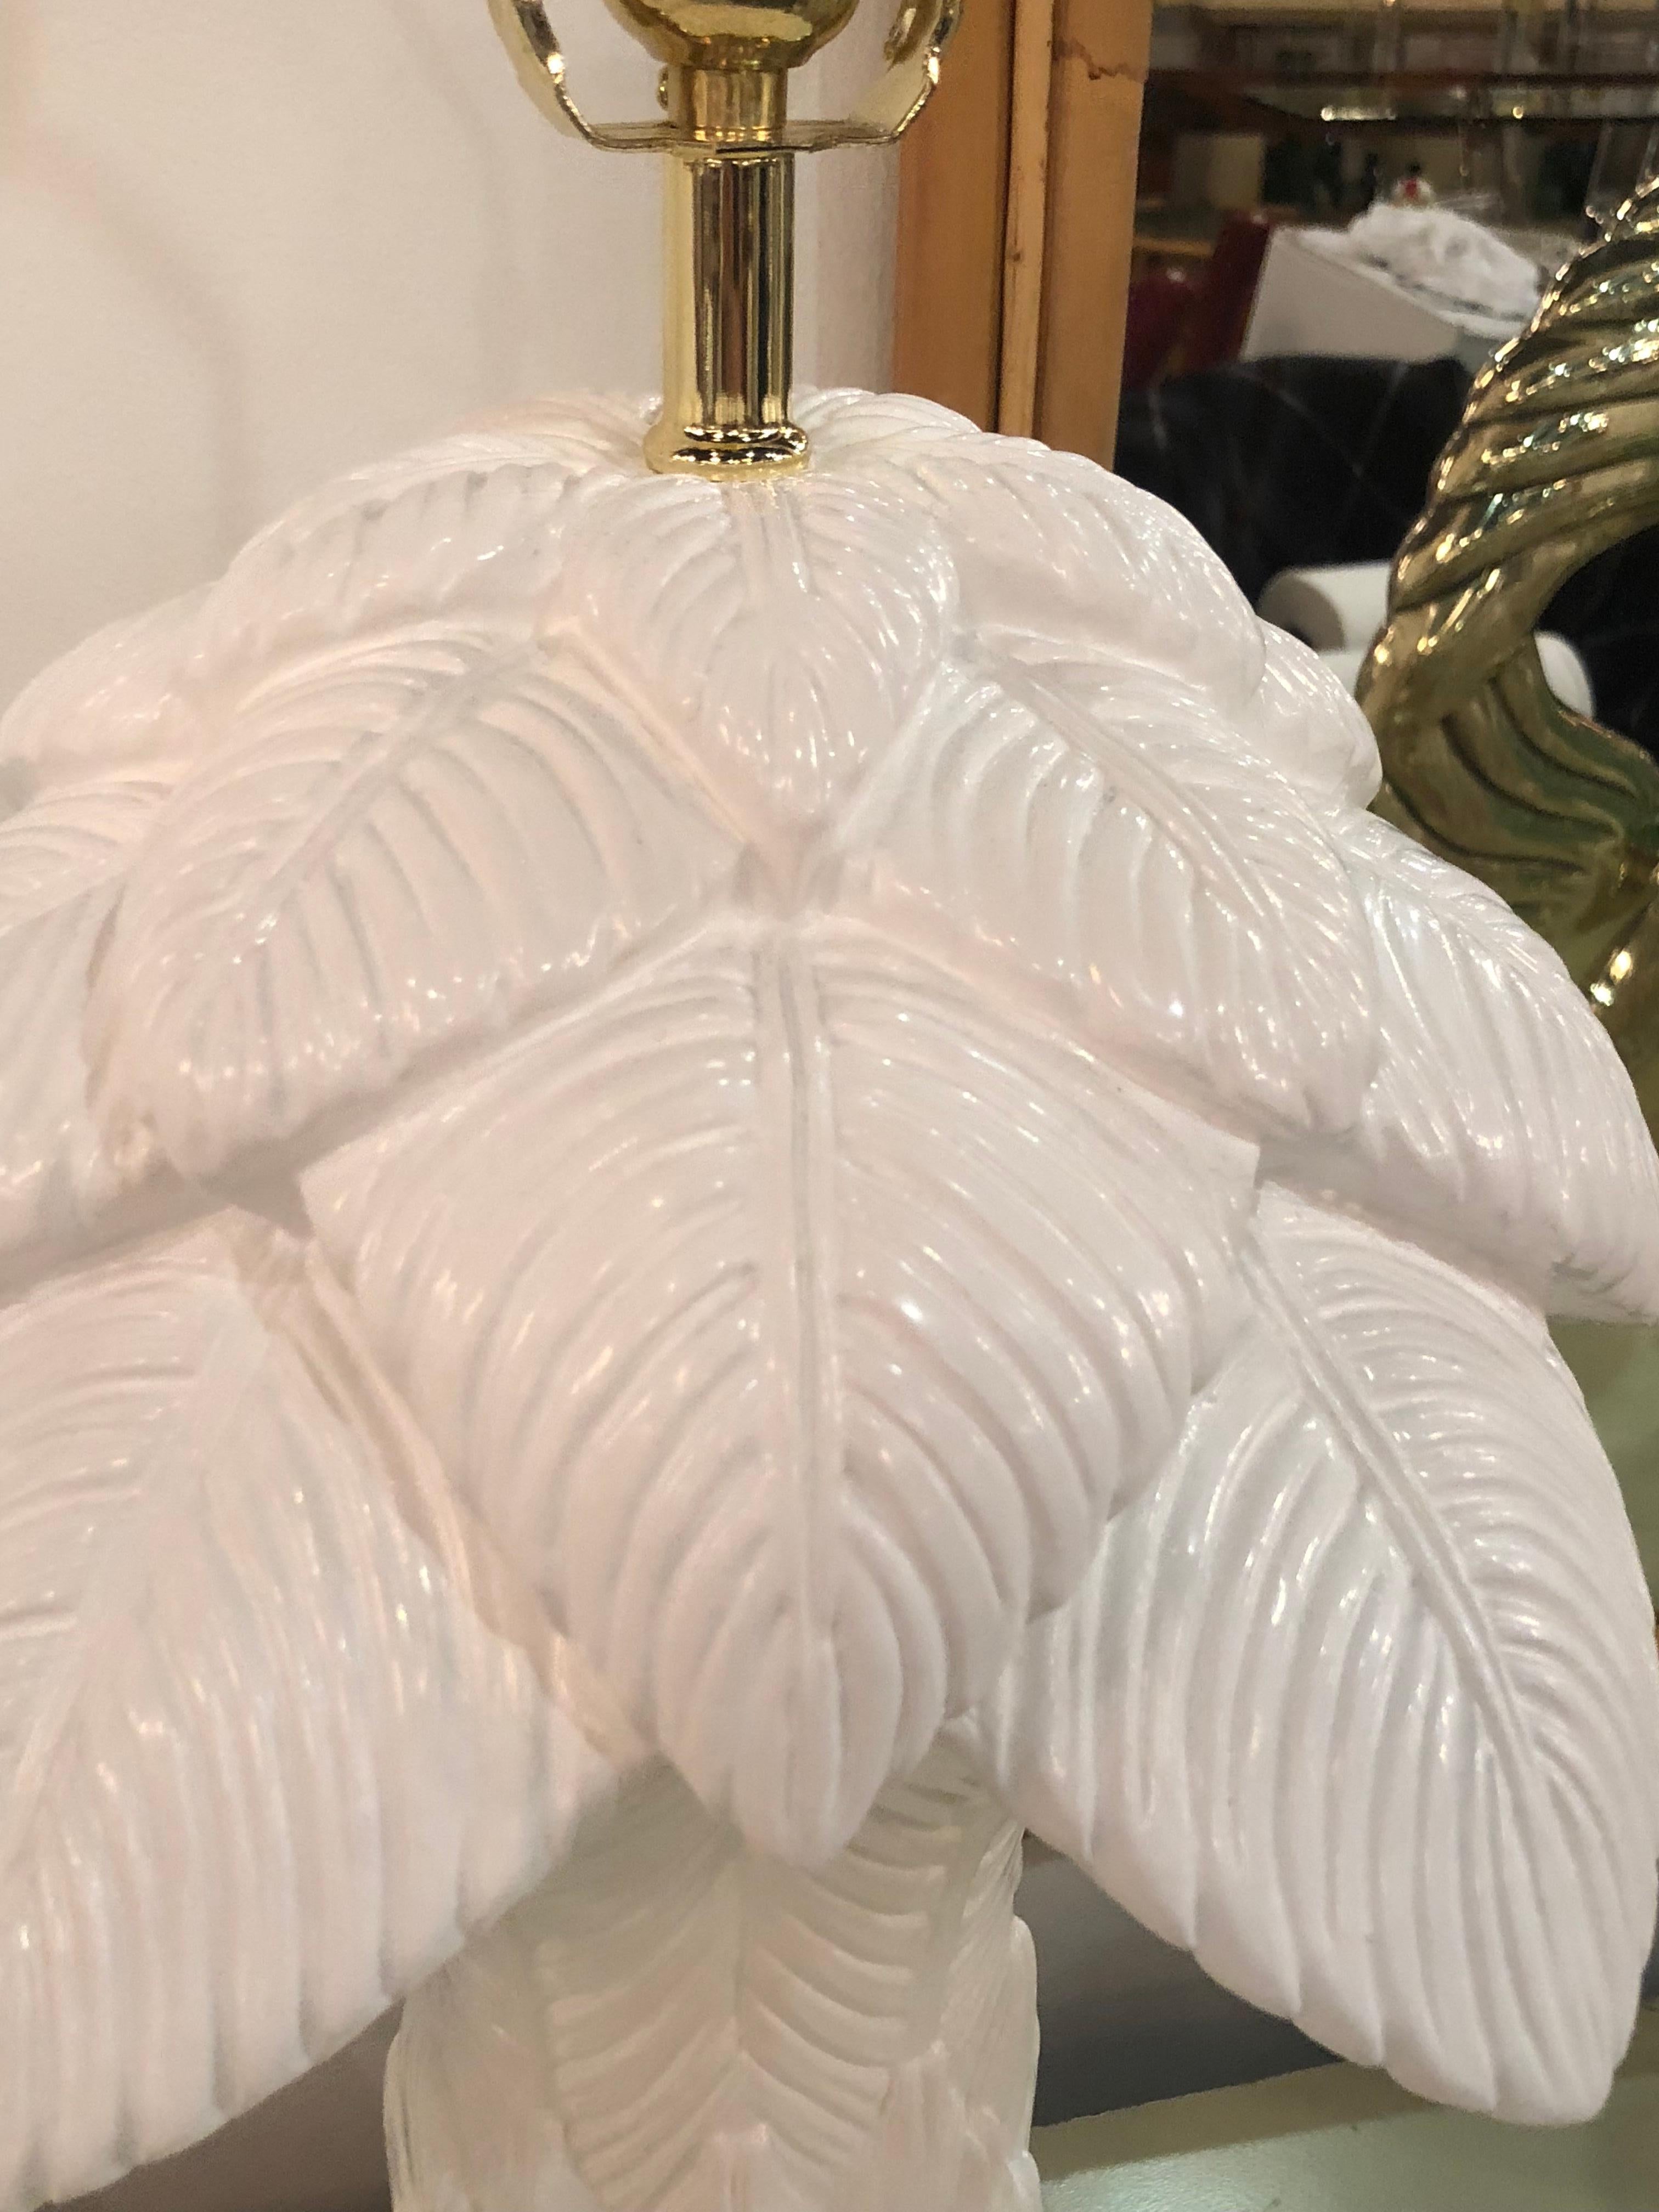 Hollywood Regency Vintage Pair of Plaster Palm Tree Frond Leaves Table Lamps White Lacquered Brass